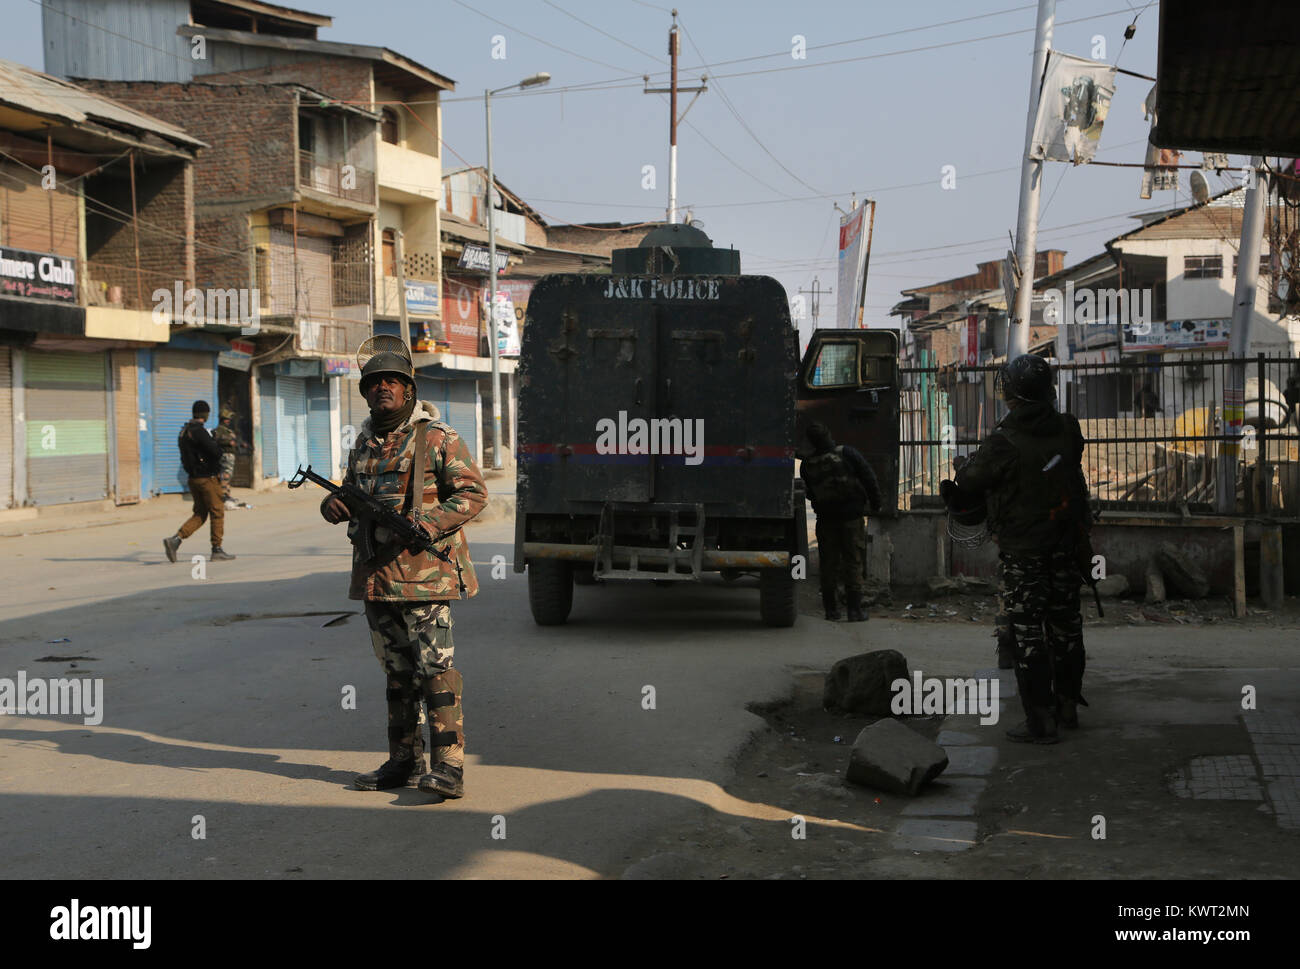 Sopore, . 6th Jan, 2018. Indian police and paramilitary troopers stand guard near the site of an improvised explosive device (IED) blast in Sopore town of Baramulla district, about 50 km northwest of Srinagar city, the summer capital of , on Jan. 6, 2018. At least four policemen were killed and two others wounded Saturday after militants triggered an improvised explosive device (IED) blast in restive , police said. Credit: Javed Dar/Xinhua/Alamy Live News Stock Photo